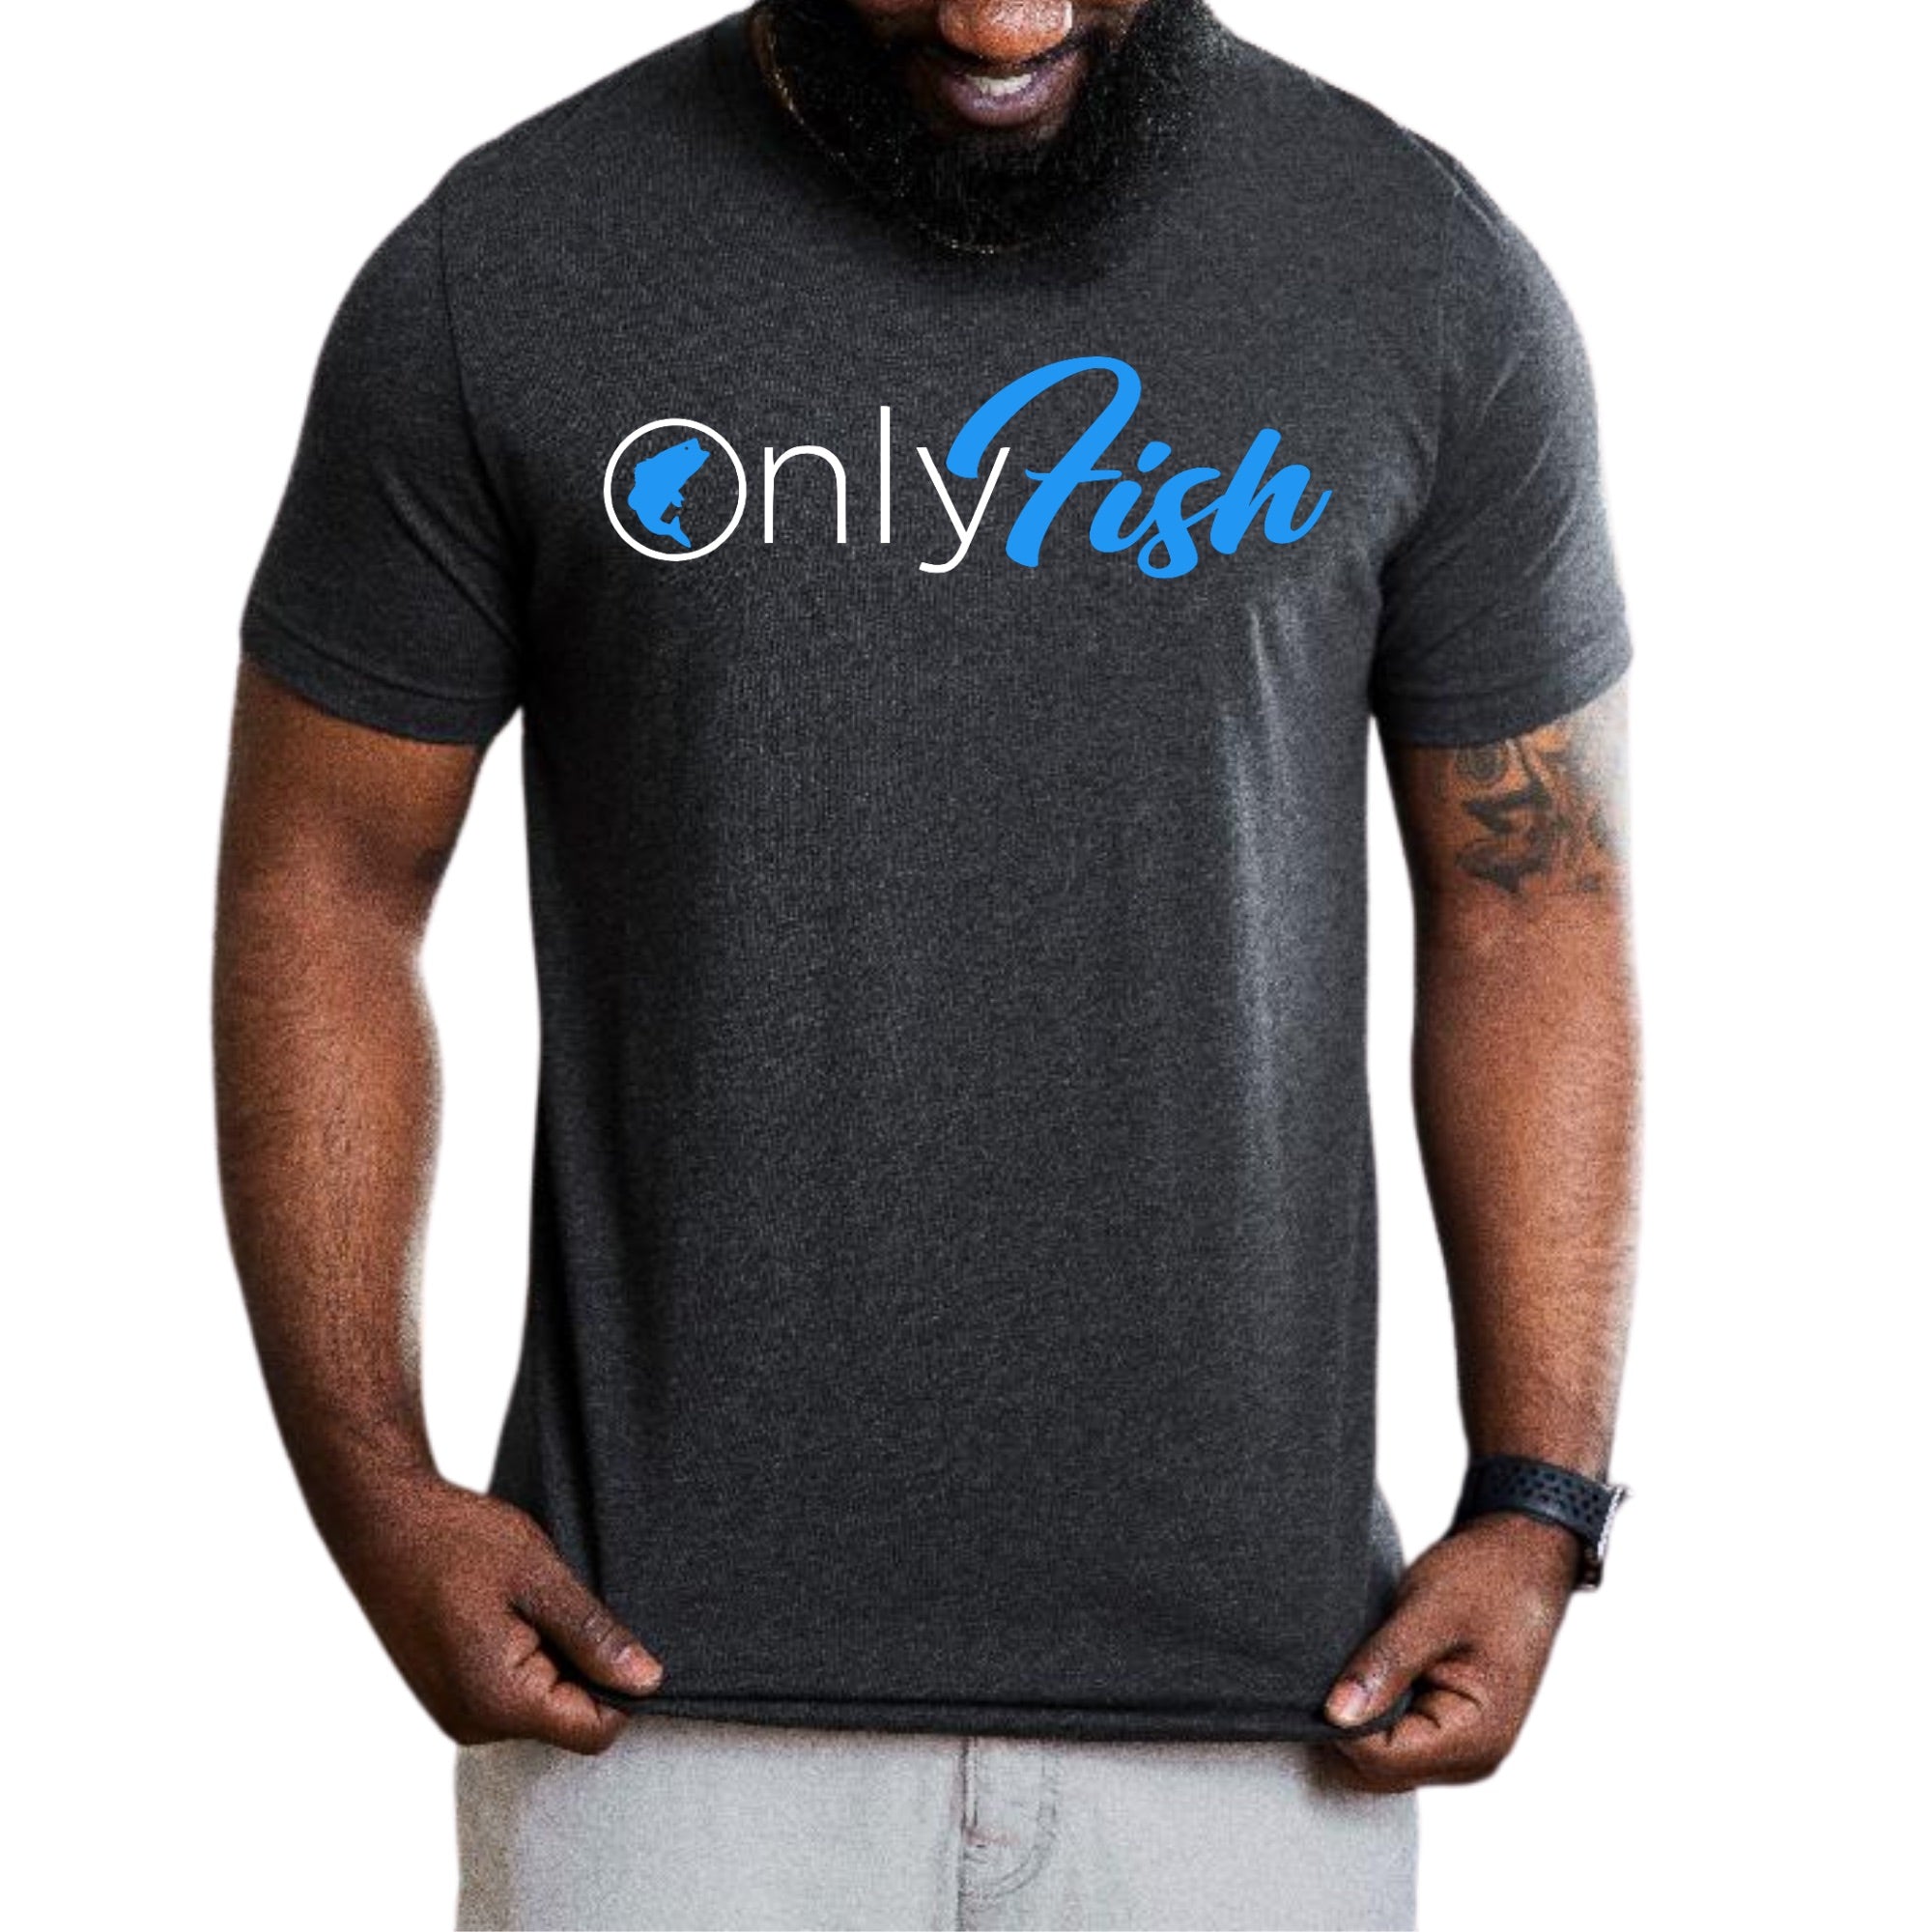 Only Fish Shirt